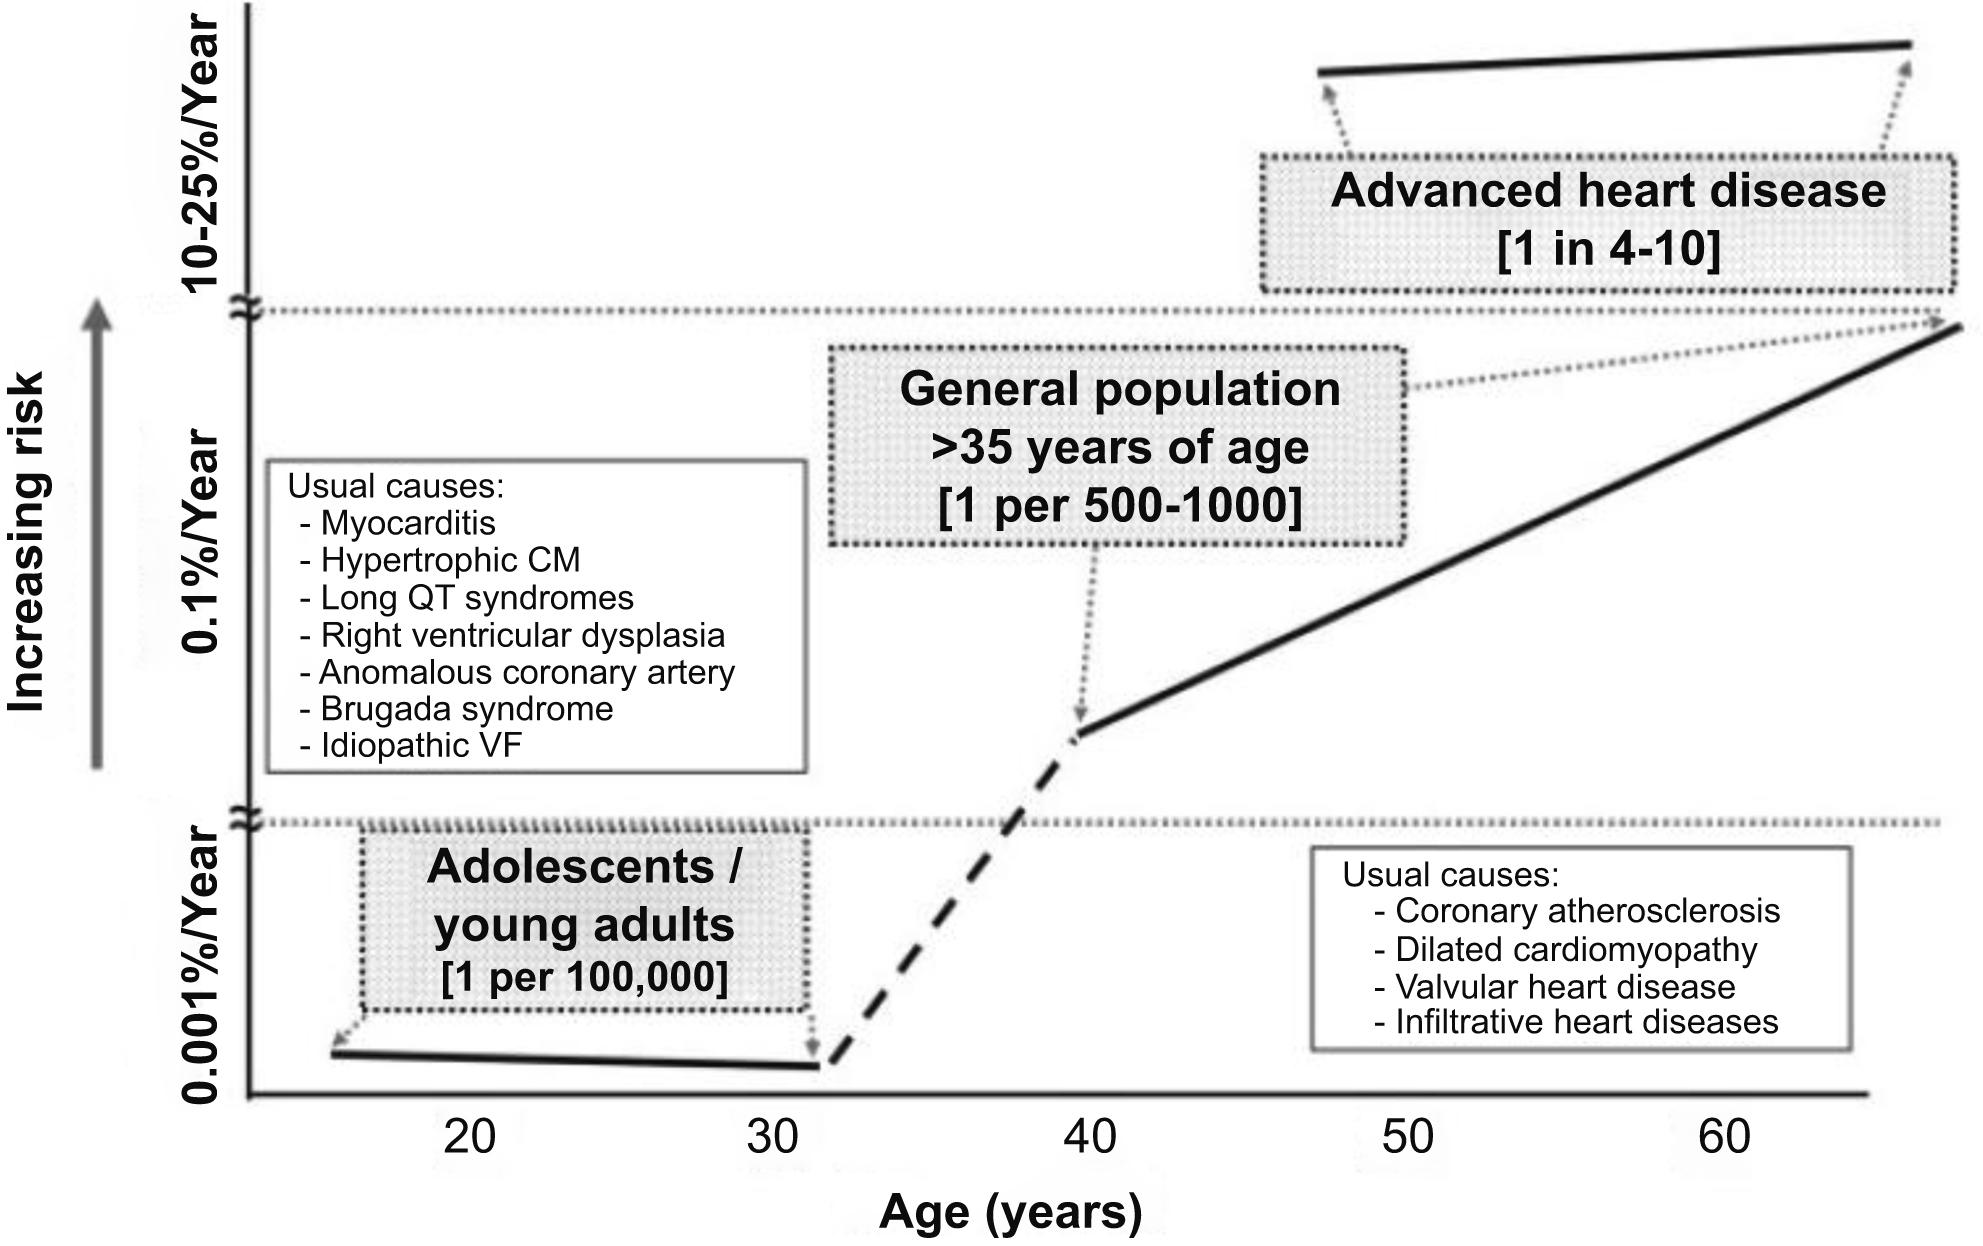 Figure 11.1, The incidence of sudden death increases with age. Note that sudden death is associated with various diseases throughout life: cardiomyopathies, myocarditis, congenital coronary artery anomalies, and channelopathies play a major causative role in the young whereas atherosclerotic coronary artery disease in adults and in the elderly.